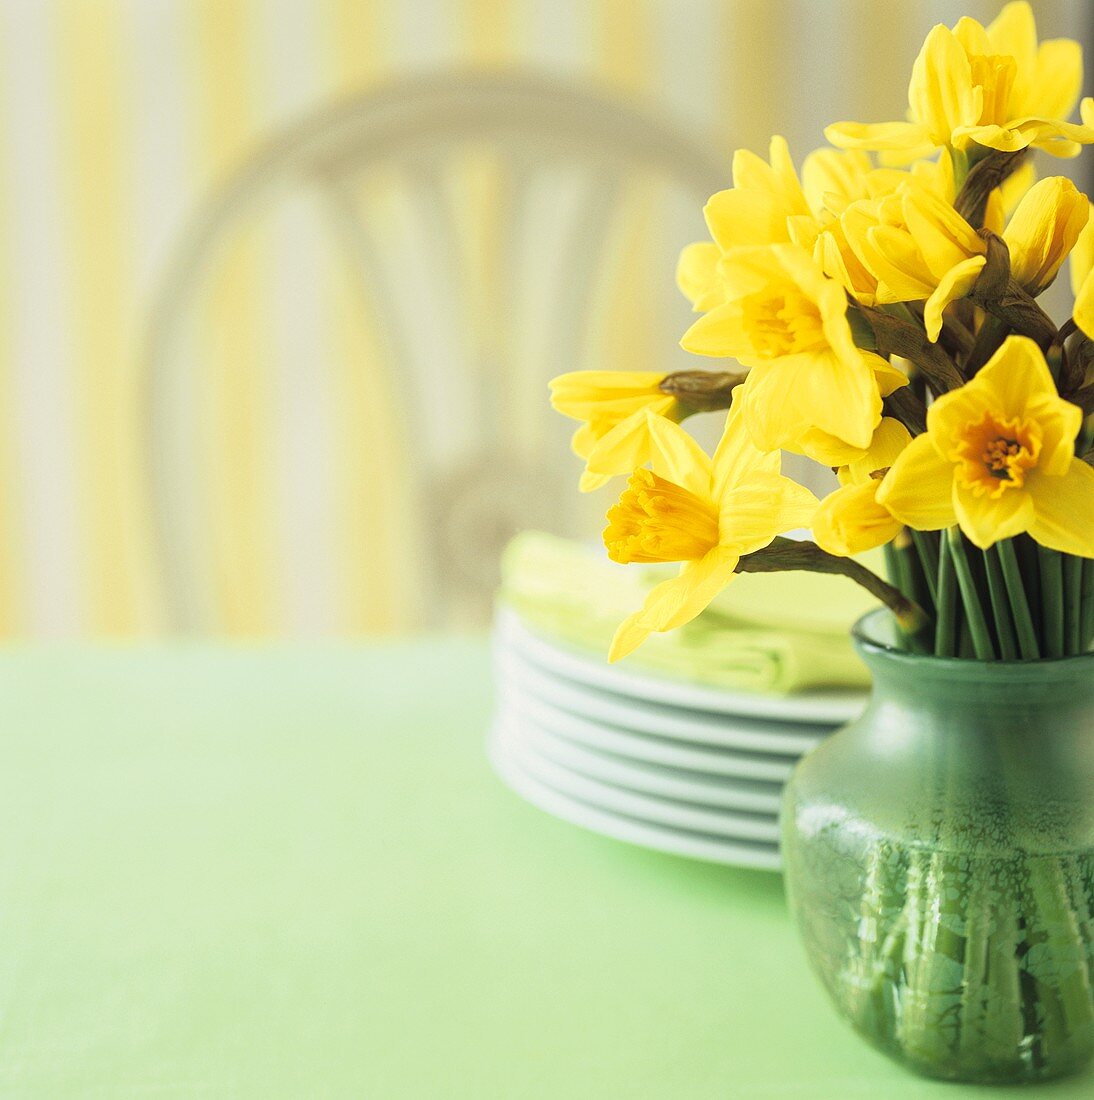 Vase of daffodils and pile of plates on a table